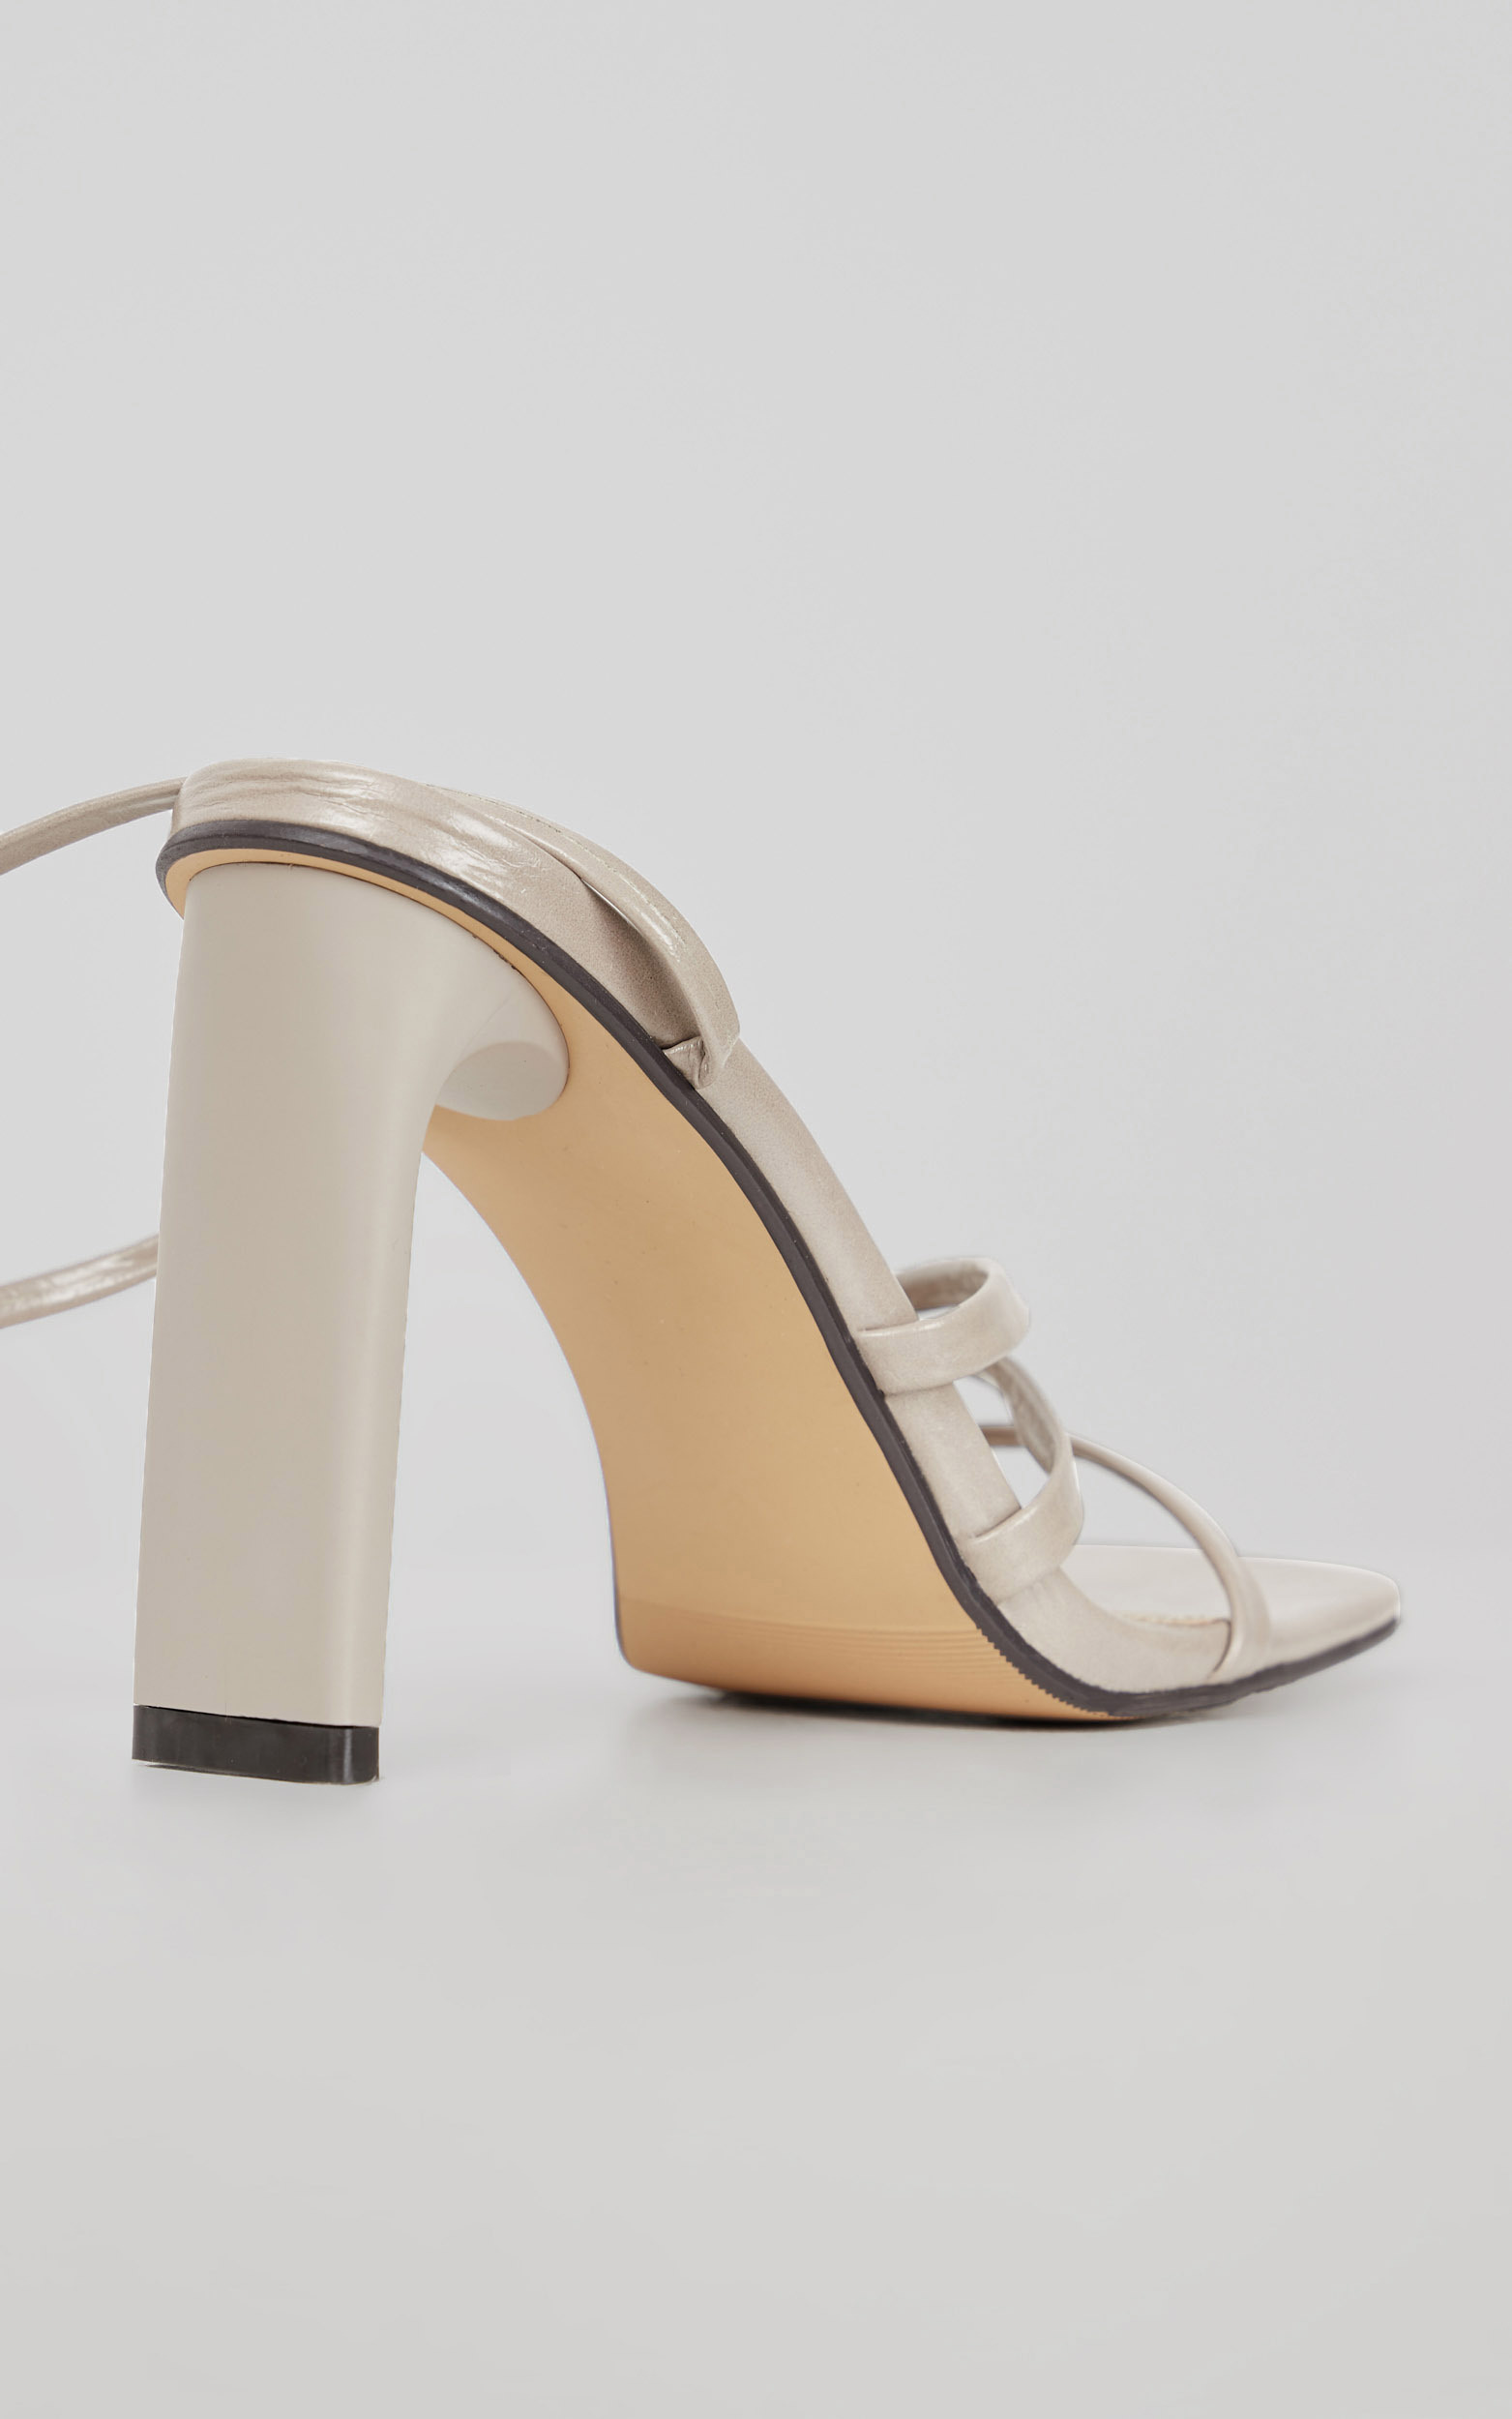 4th & Reckless - Dove Heels in Nude - 05, BRN2, hi-res image number null